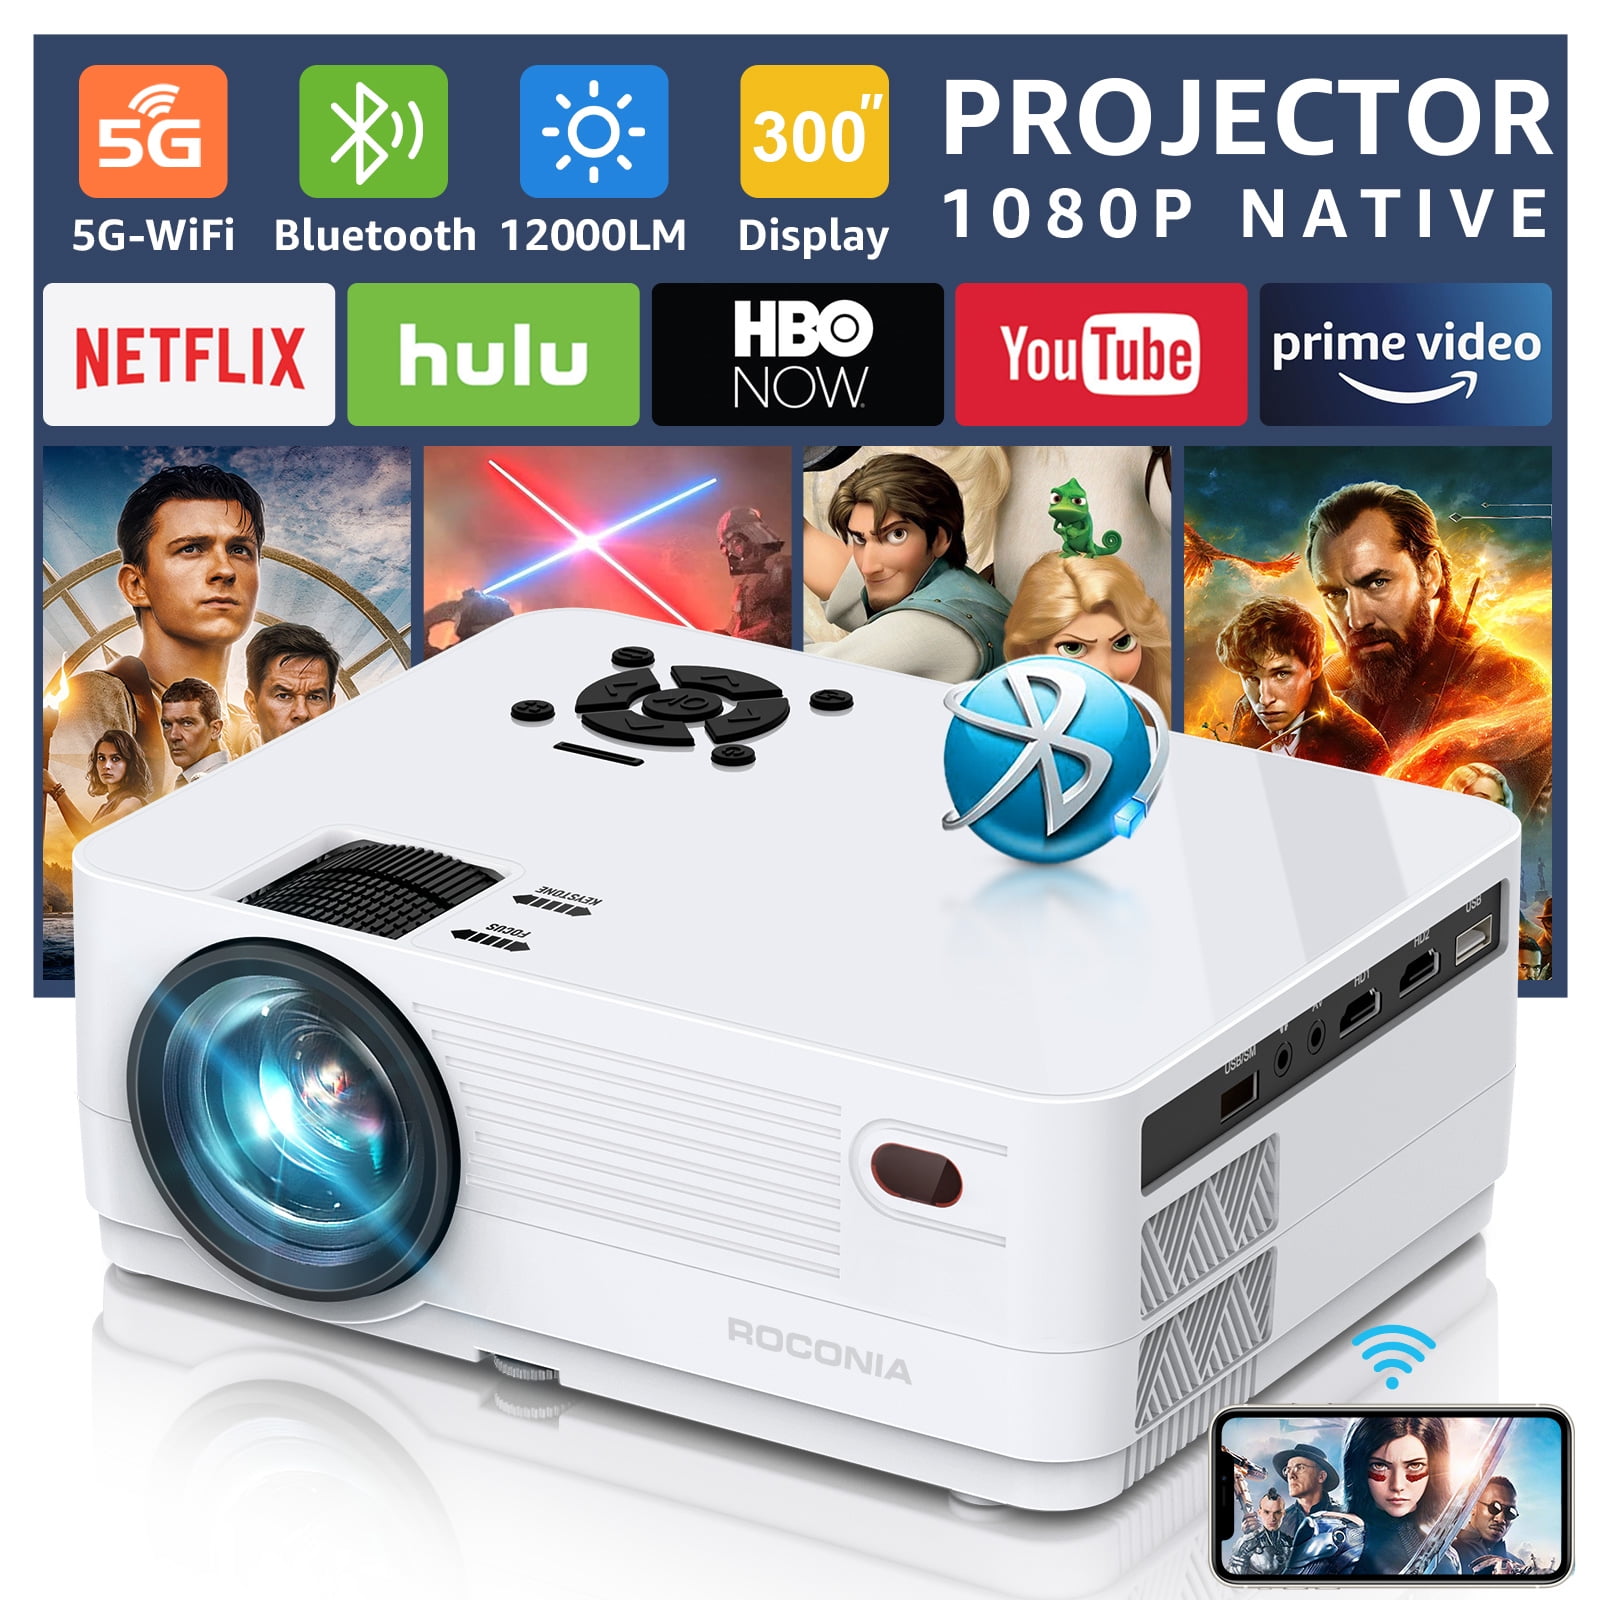 Samsaimo Native 1080P 5G WiFi Bluetooth Projector,12000LM Full HD Movie  Projector, LCD technology 300